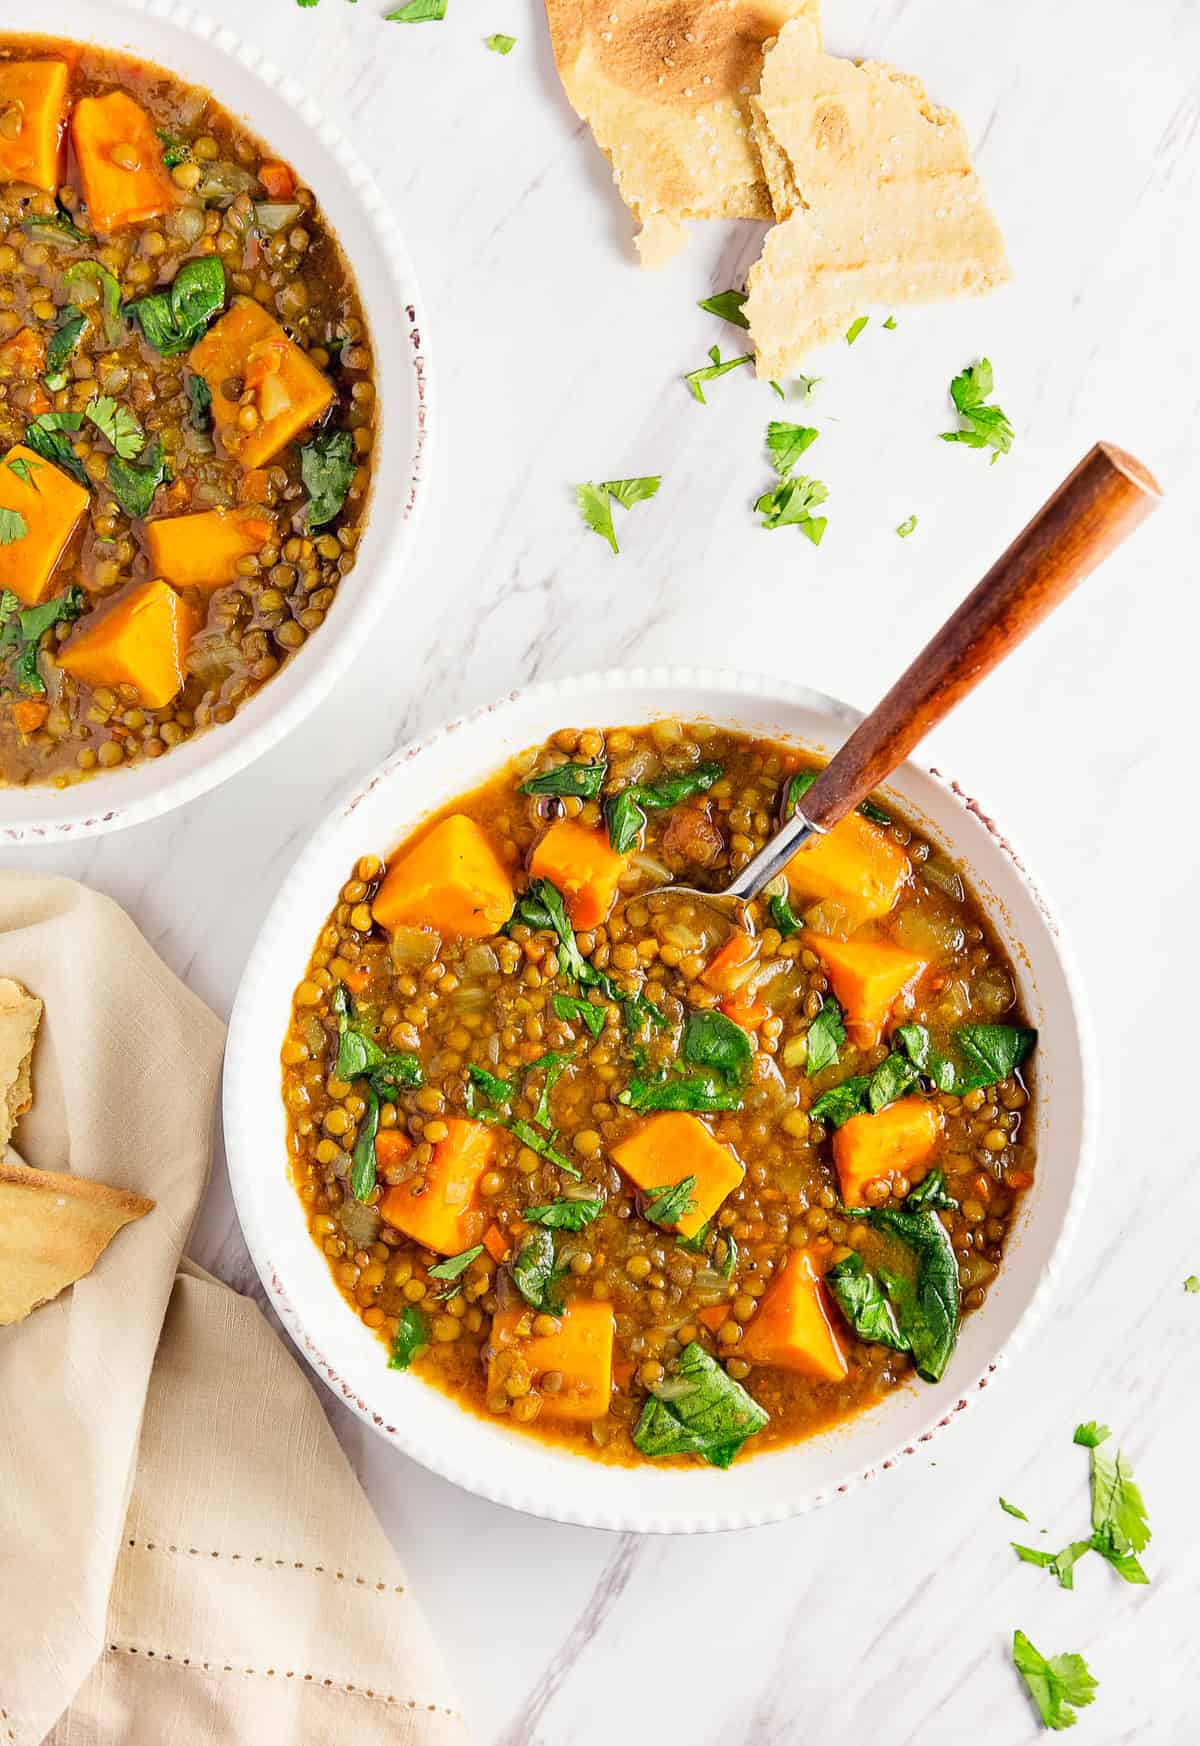 Moroccan Sweet Potato Lentil Stew, vegan, vegetarian, whole food plant based, gluten free, recipe, wfpb, healthy, oil free, no refined sugar, no oil, refined sugar free, dinner, side, side dish, dairy free, dinner party, entertaining